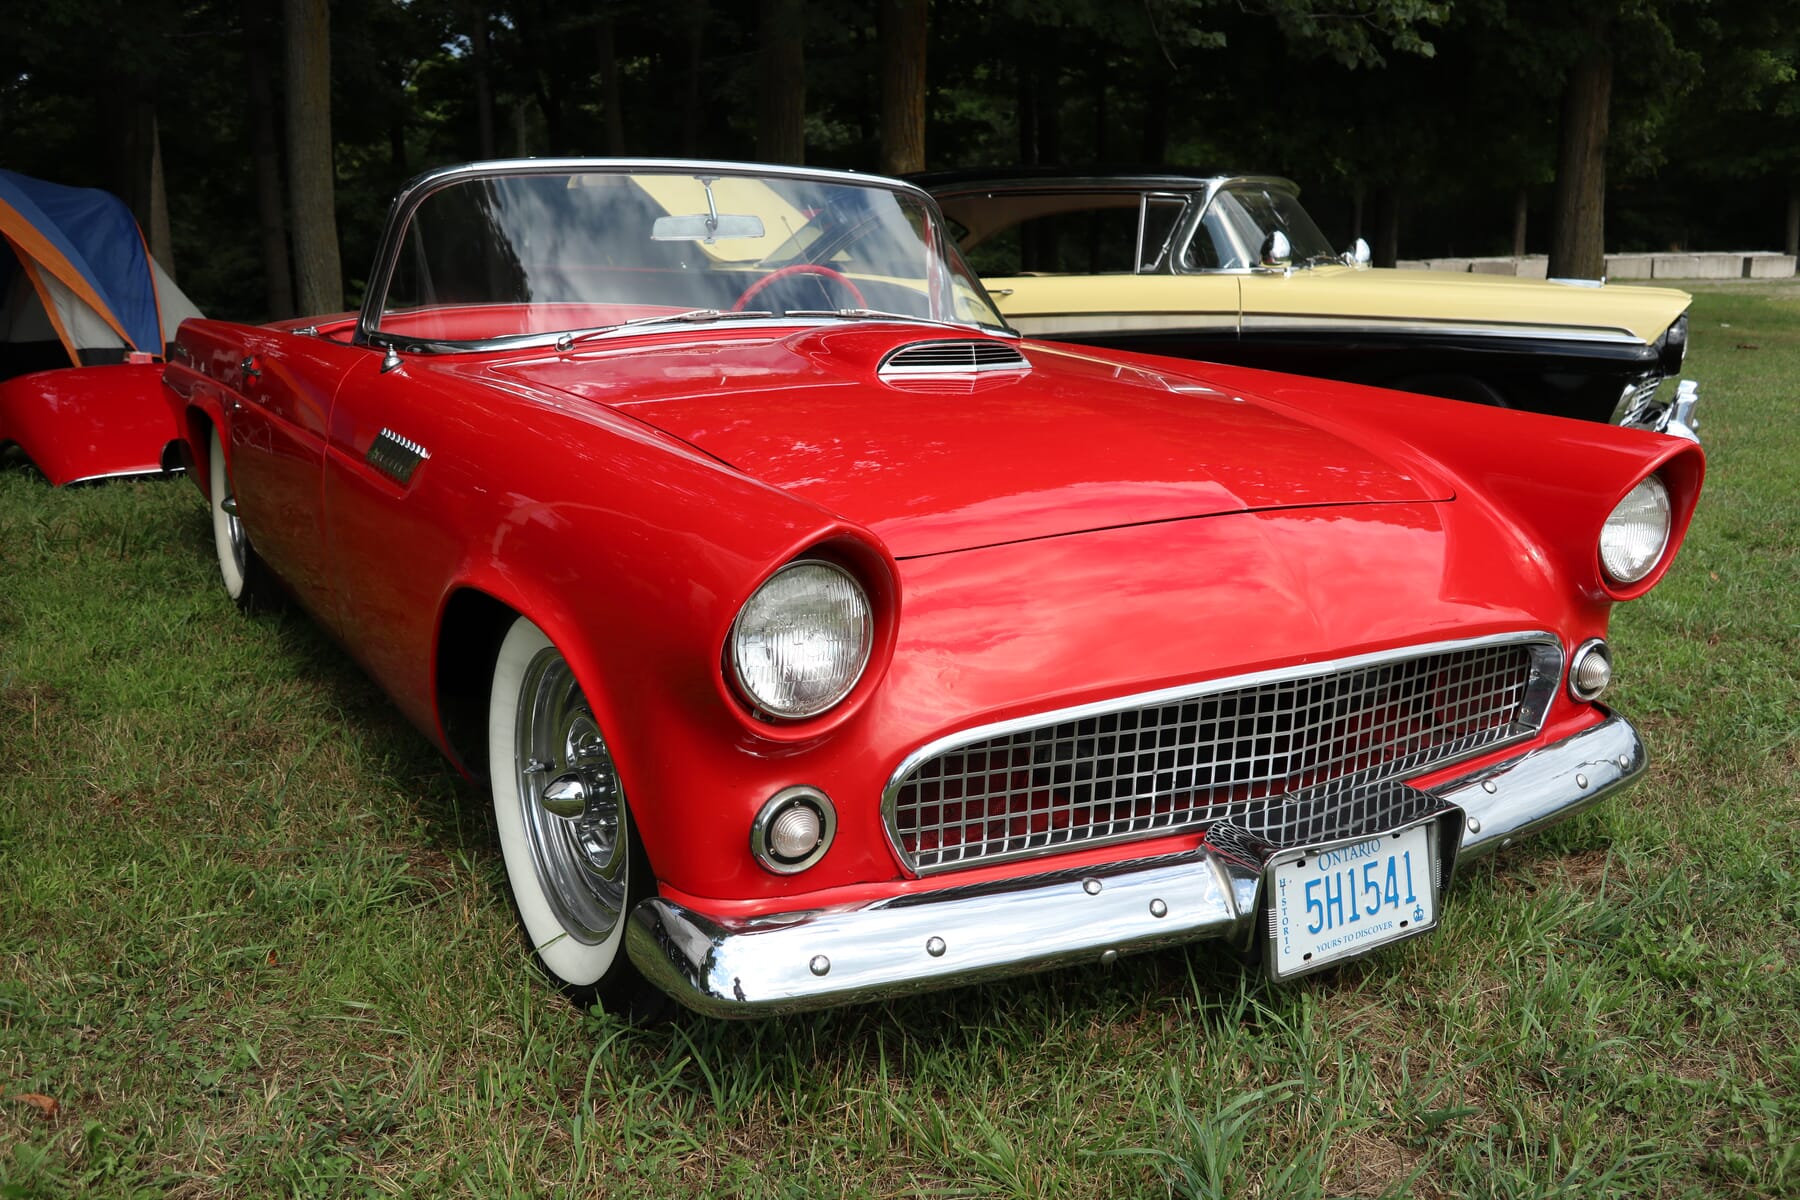 1955 Ford Thunderbird with custom bumpers and original paint